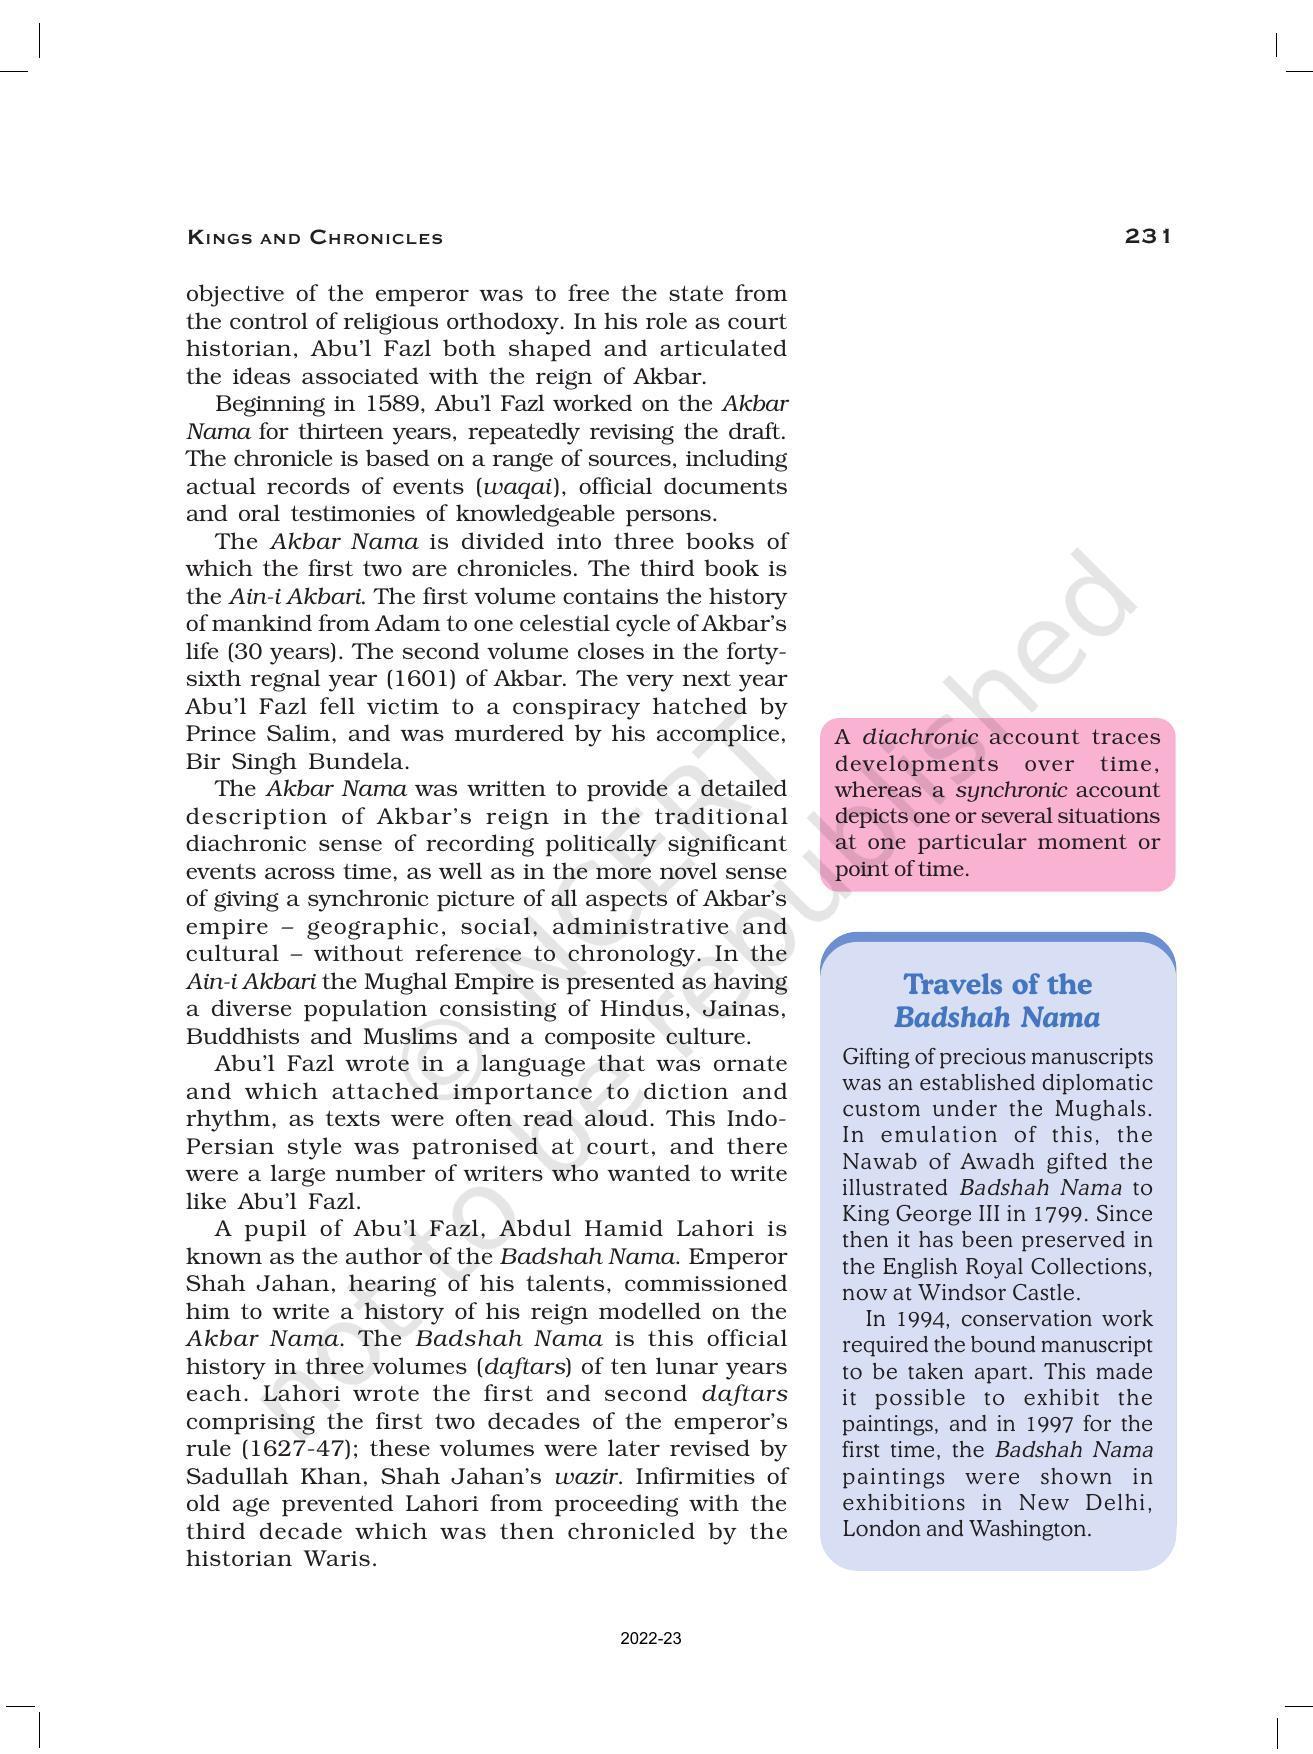 NCERT Book for Class 12 History (Part-II) Chapter 9 Kings and Chronicles - Page 8